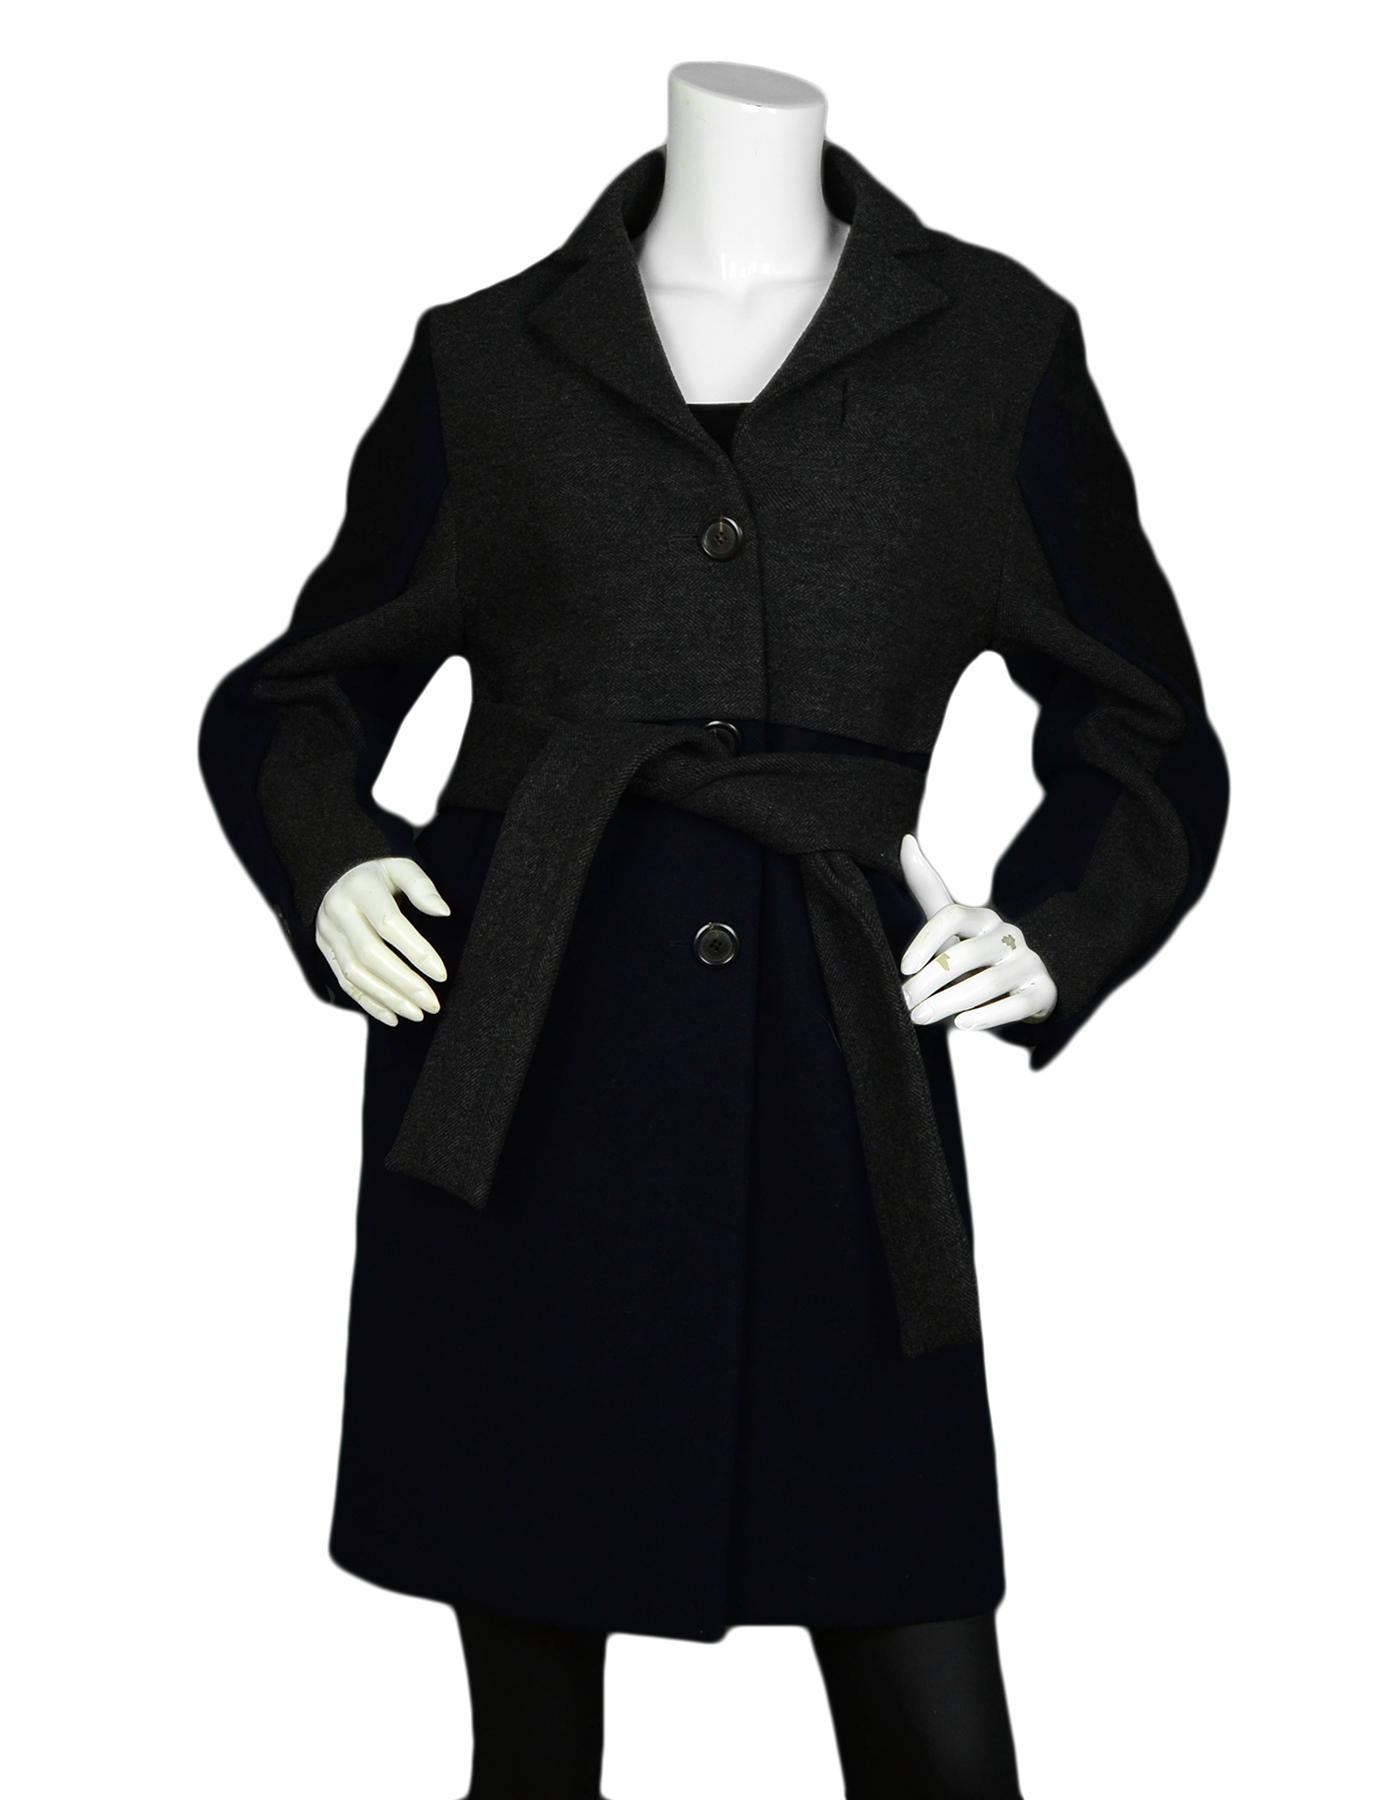 Louis Vuitton Navy Grey Wool Coat with Belt sz 36

Made In: France
Color: Navy, Grey
Materials: 100% Wool
Lining: 100% Silk
Opening/Closure: Front button down
Overall Condition: Excellent pre-owned condition
Includes: Garment Bag, Hanger

Tag Size: